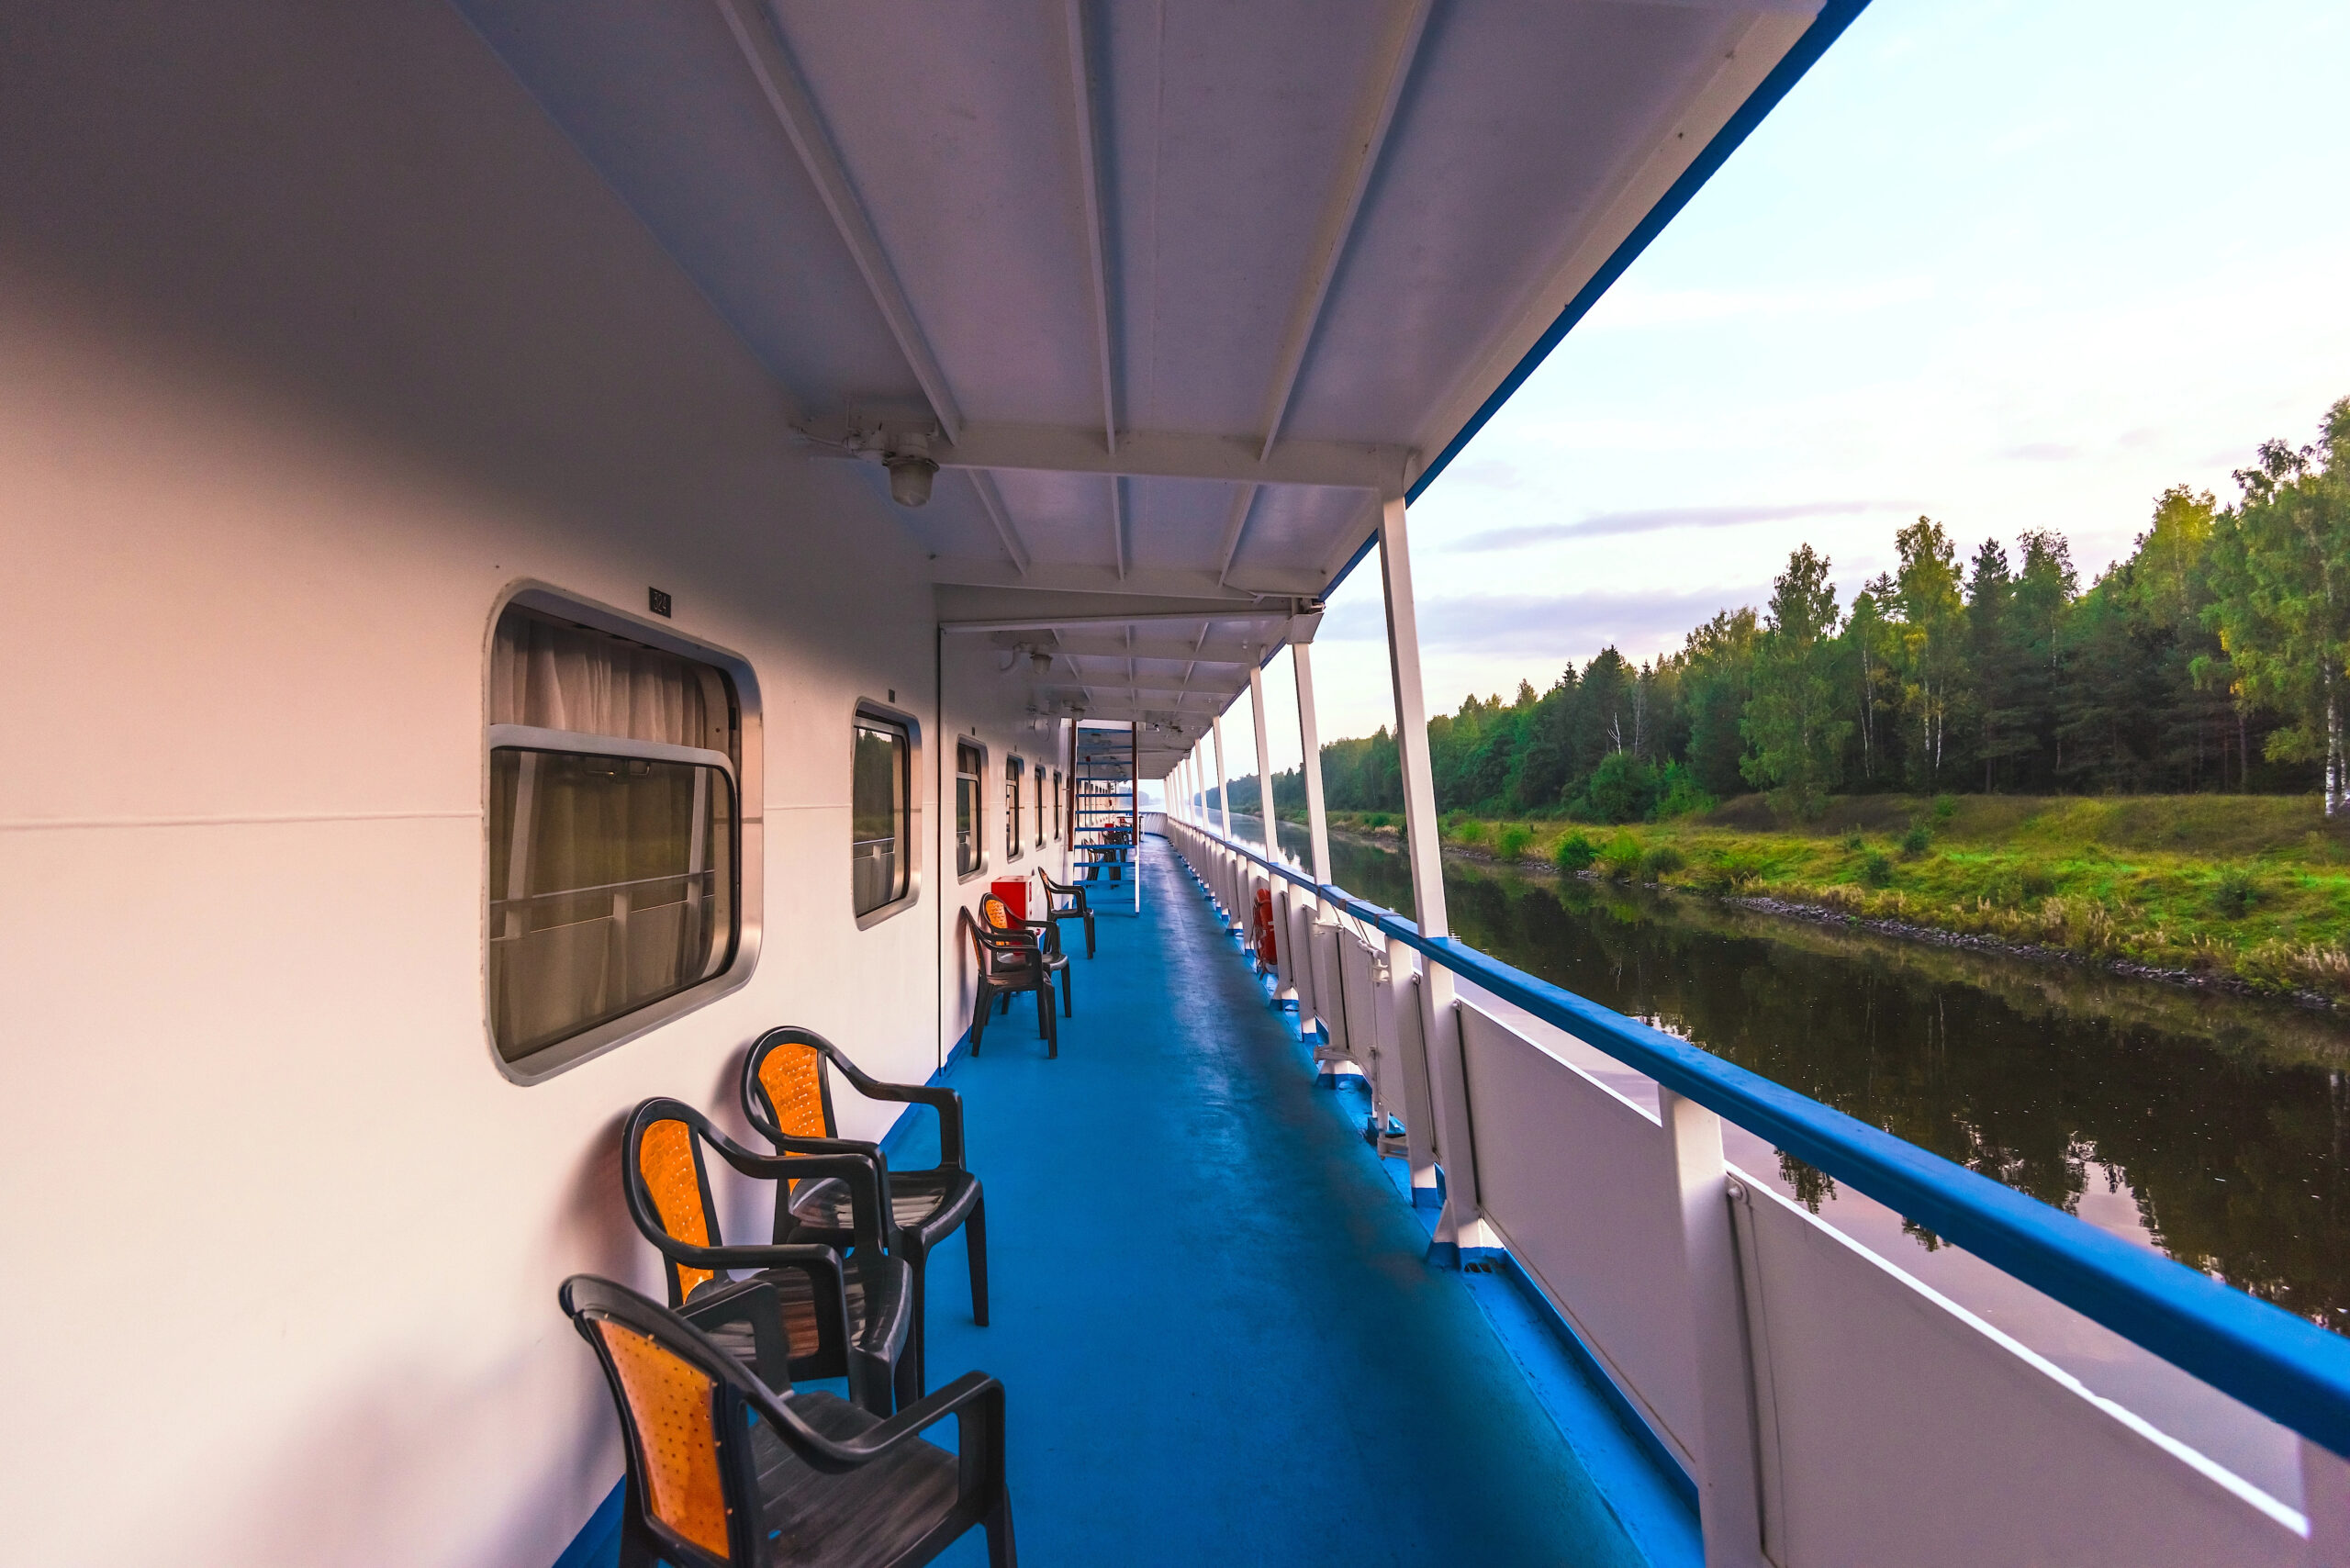 View from deck of river cruise boat with chairs and greenery.